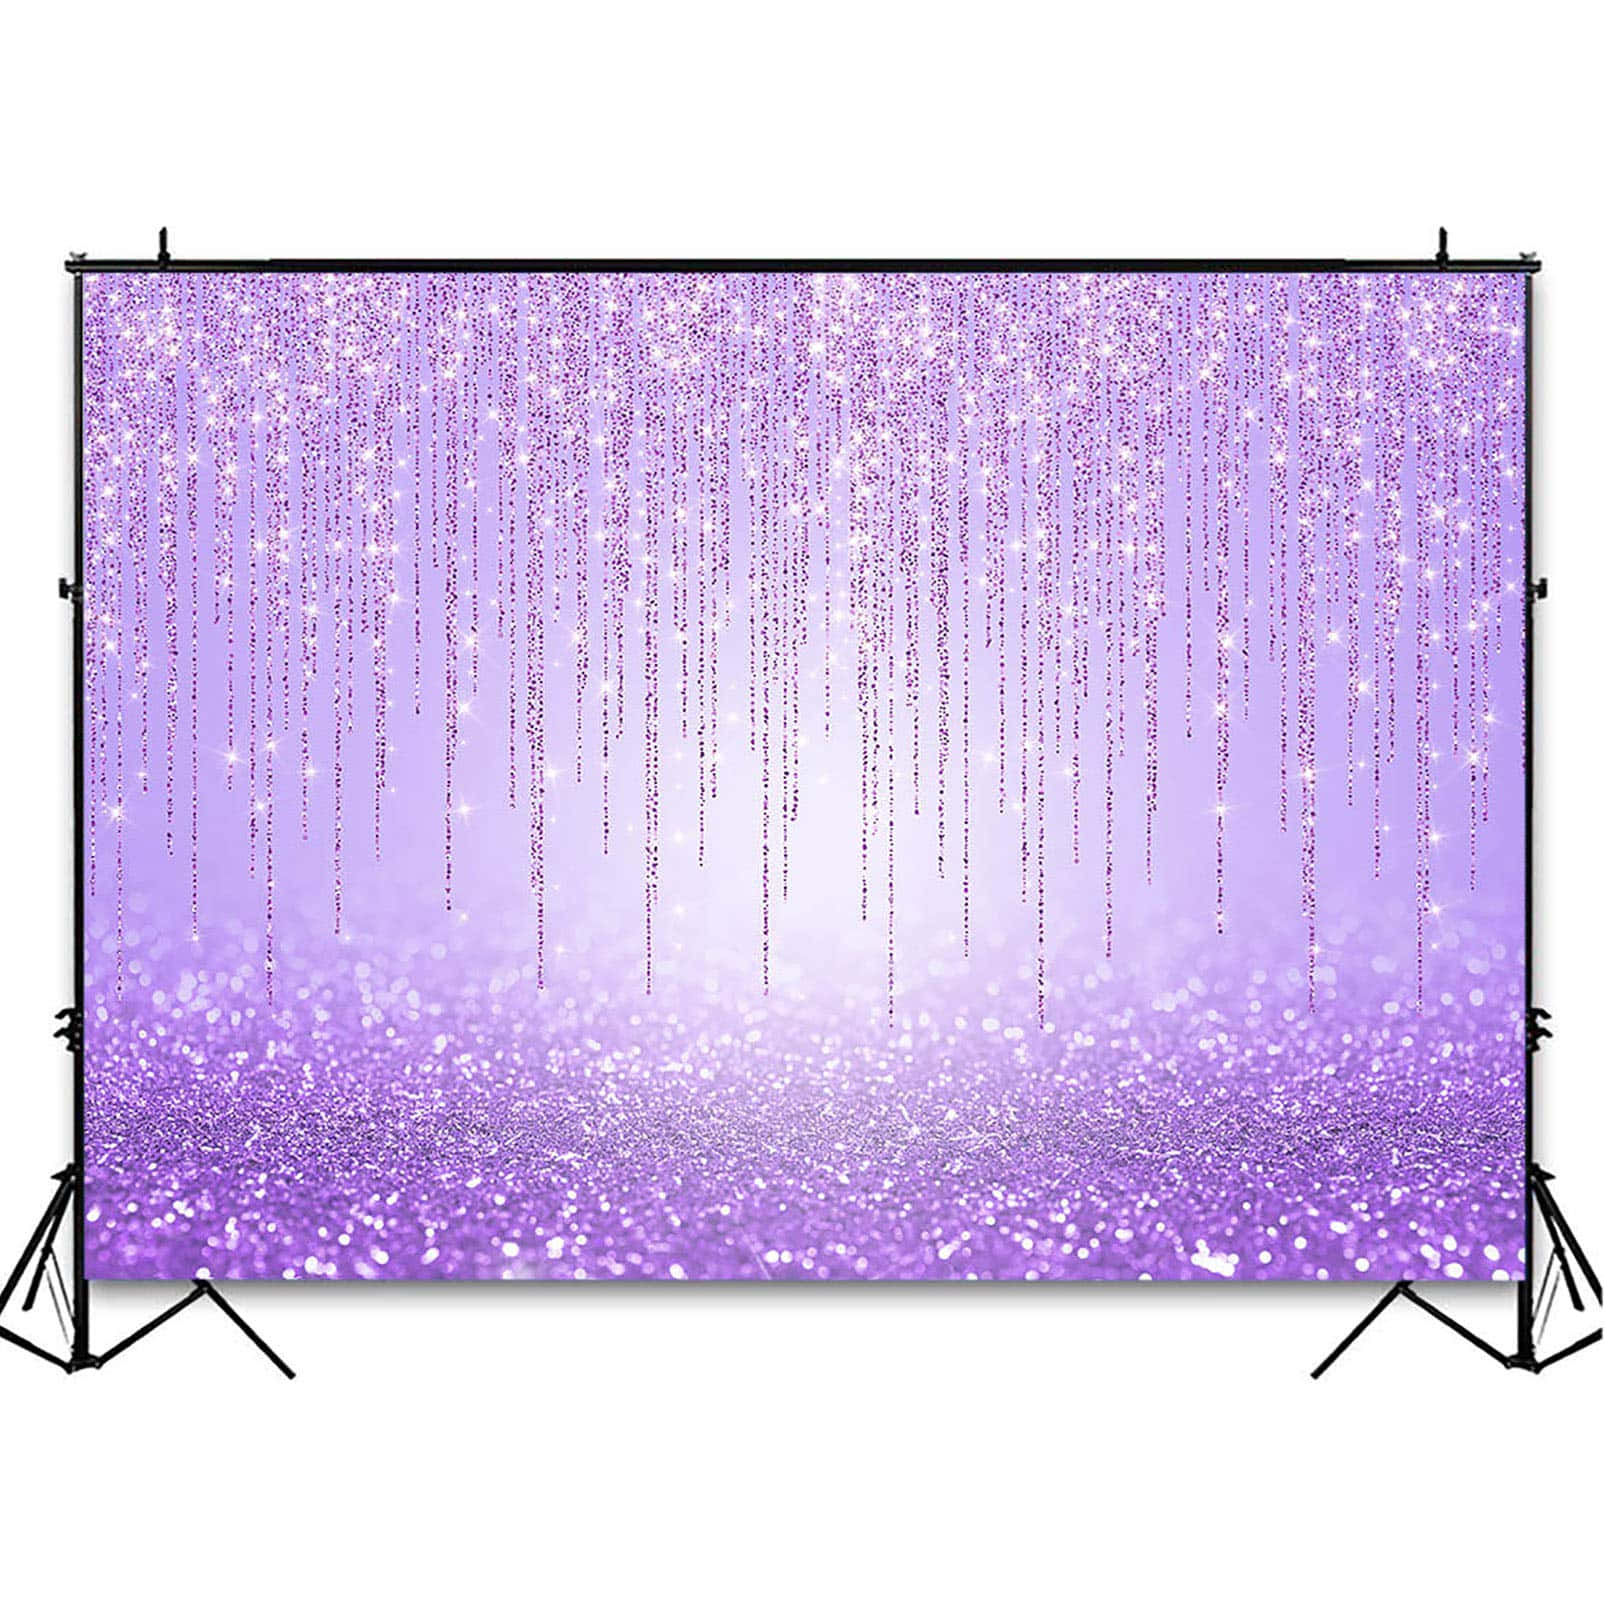 Brighten up your day with a beautiful purple glitter background